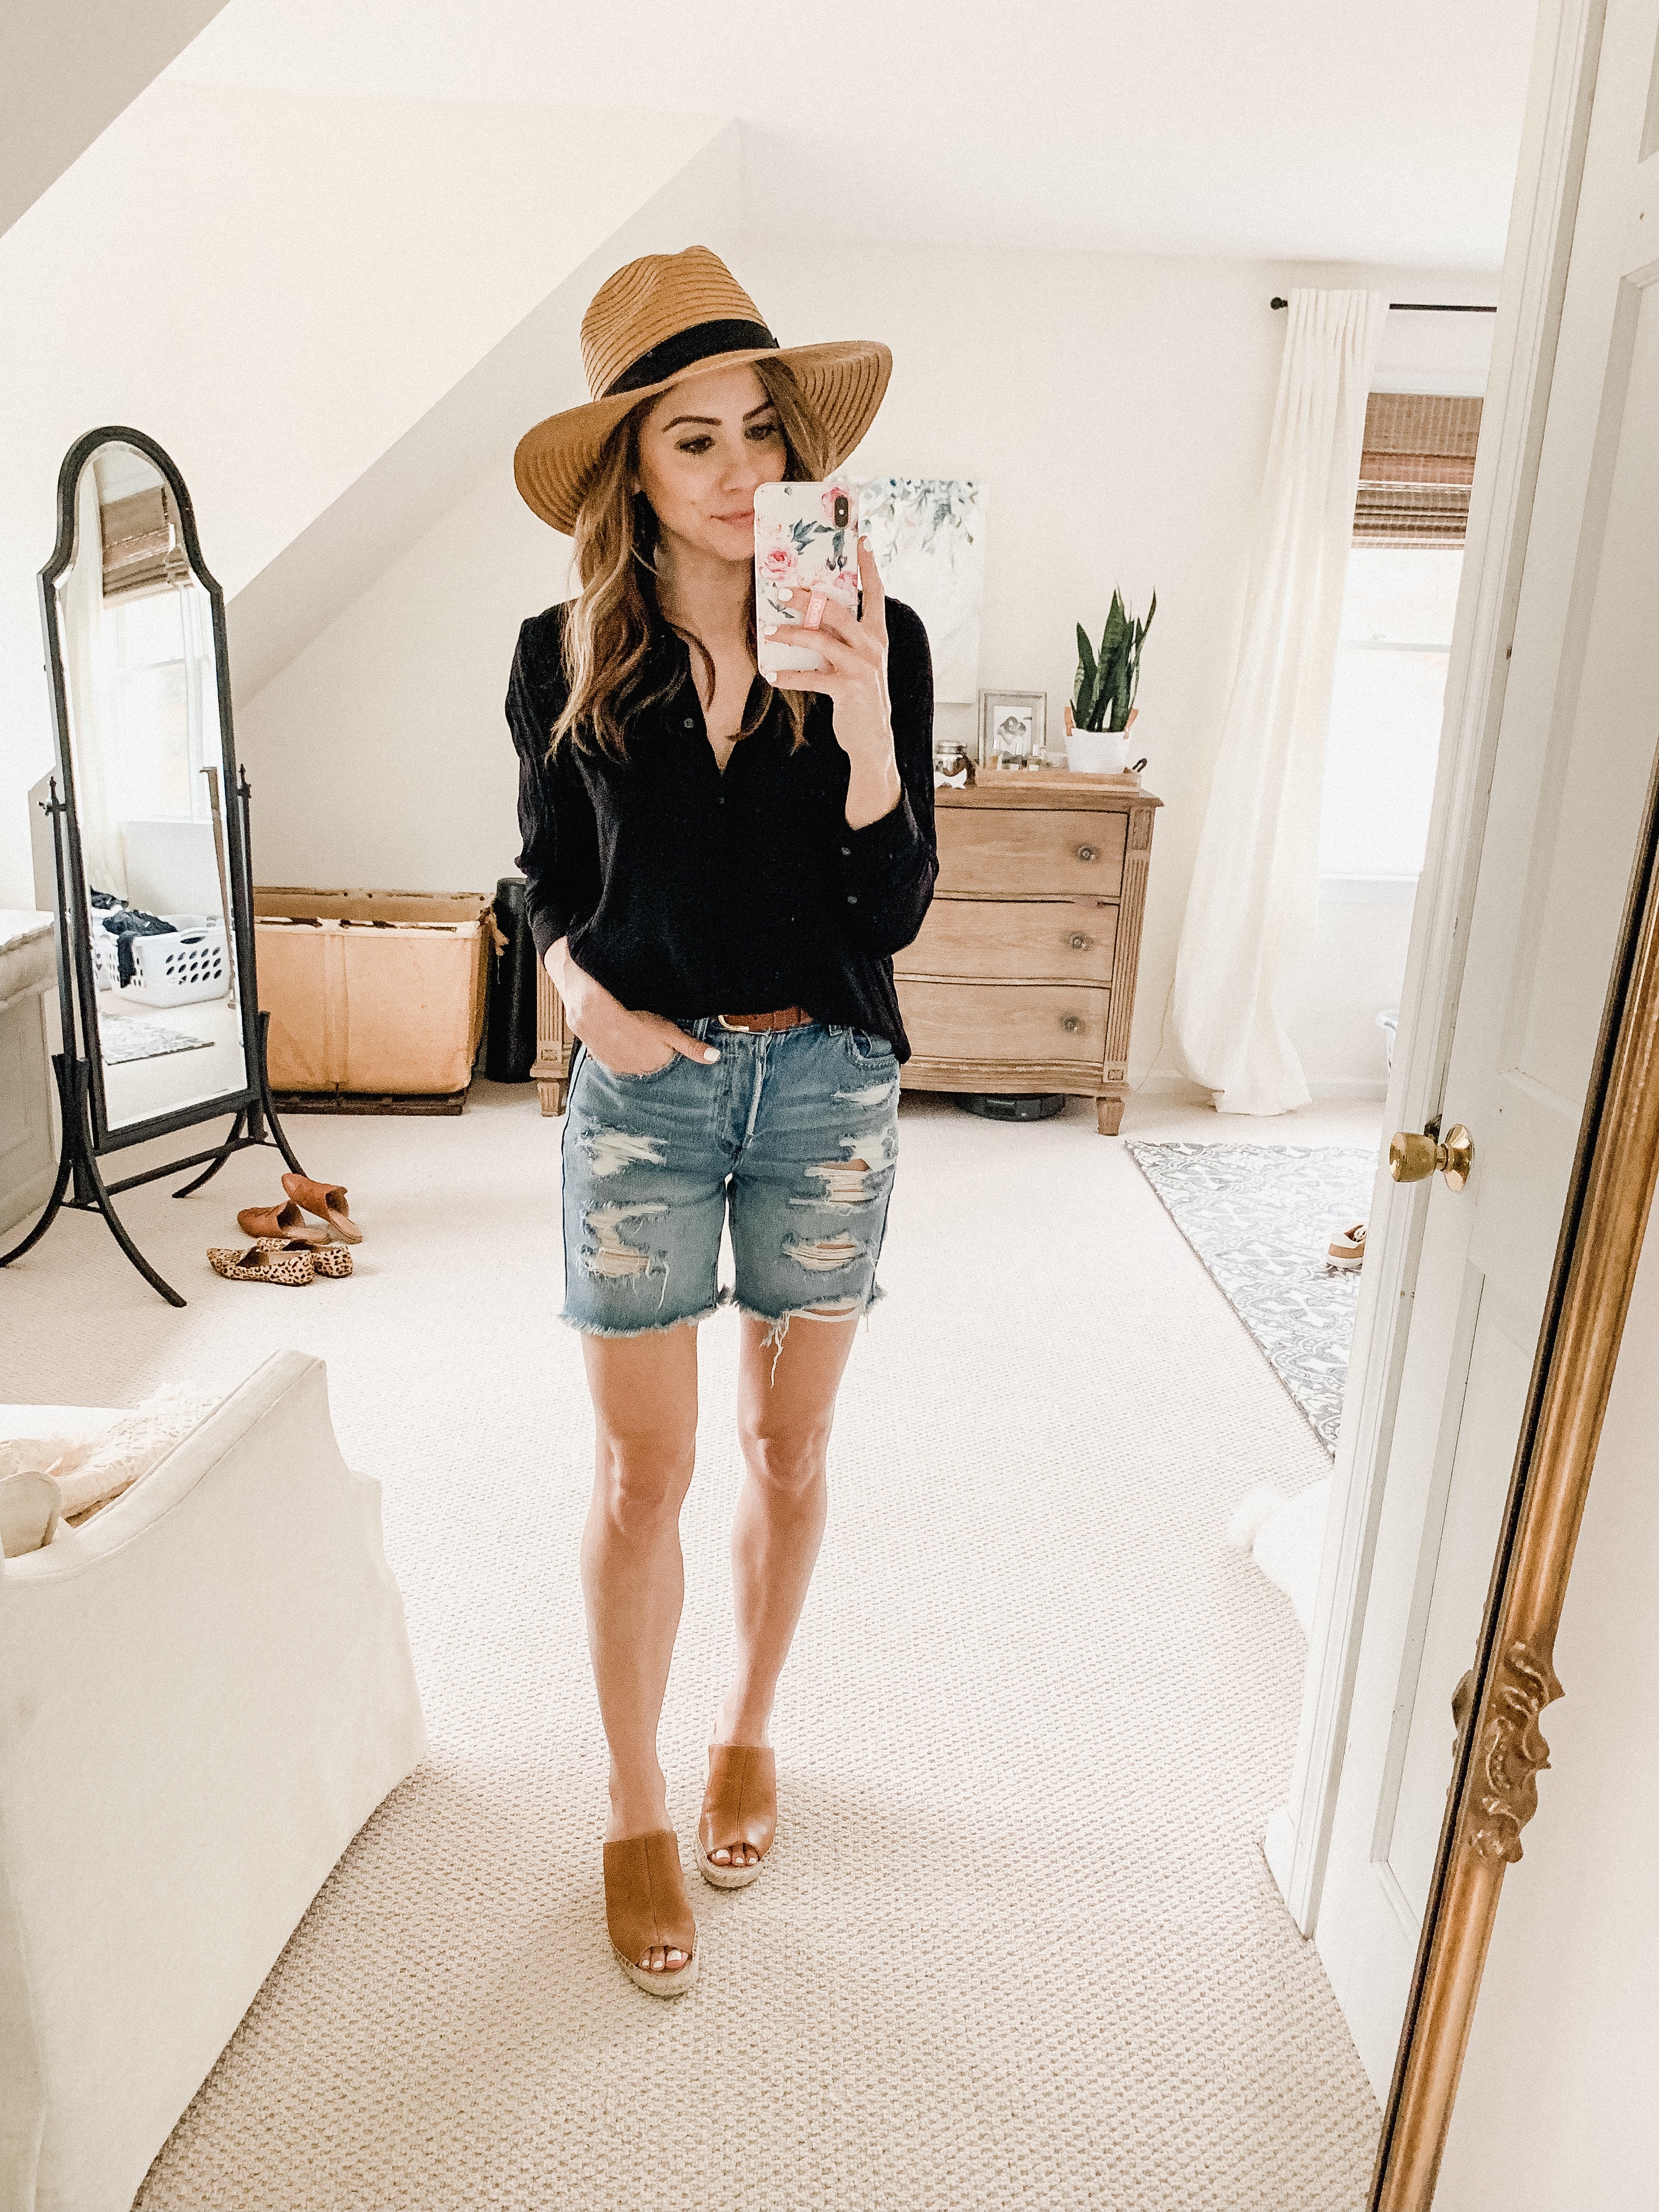 Connecticut life and style blogger Lauren McBride shares How to Style Bermuda Shorts including outfit ideas and styling tips.